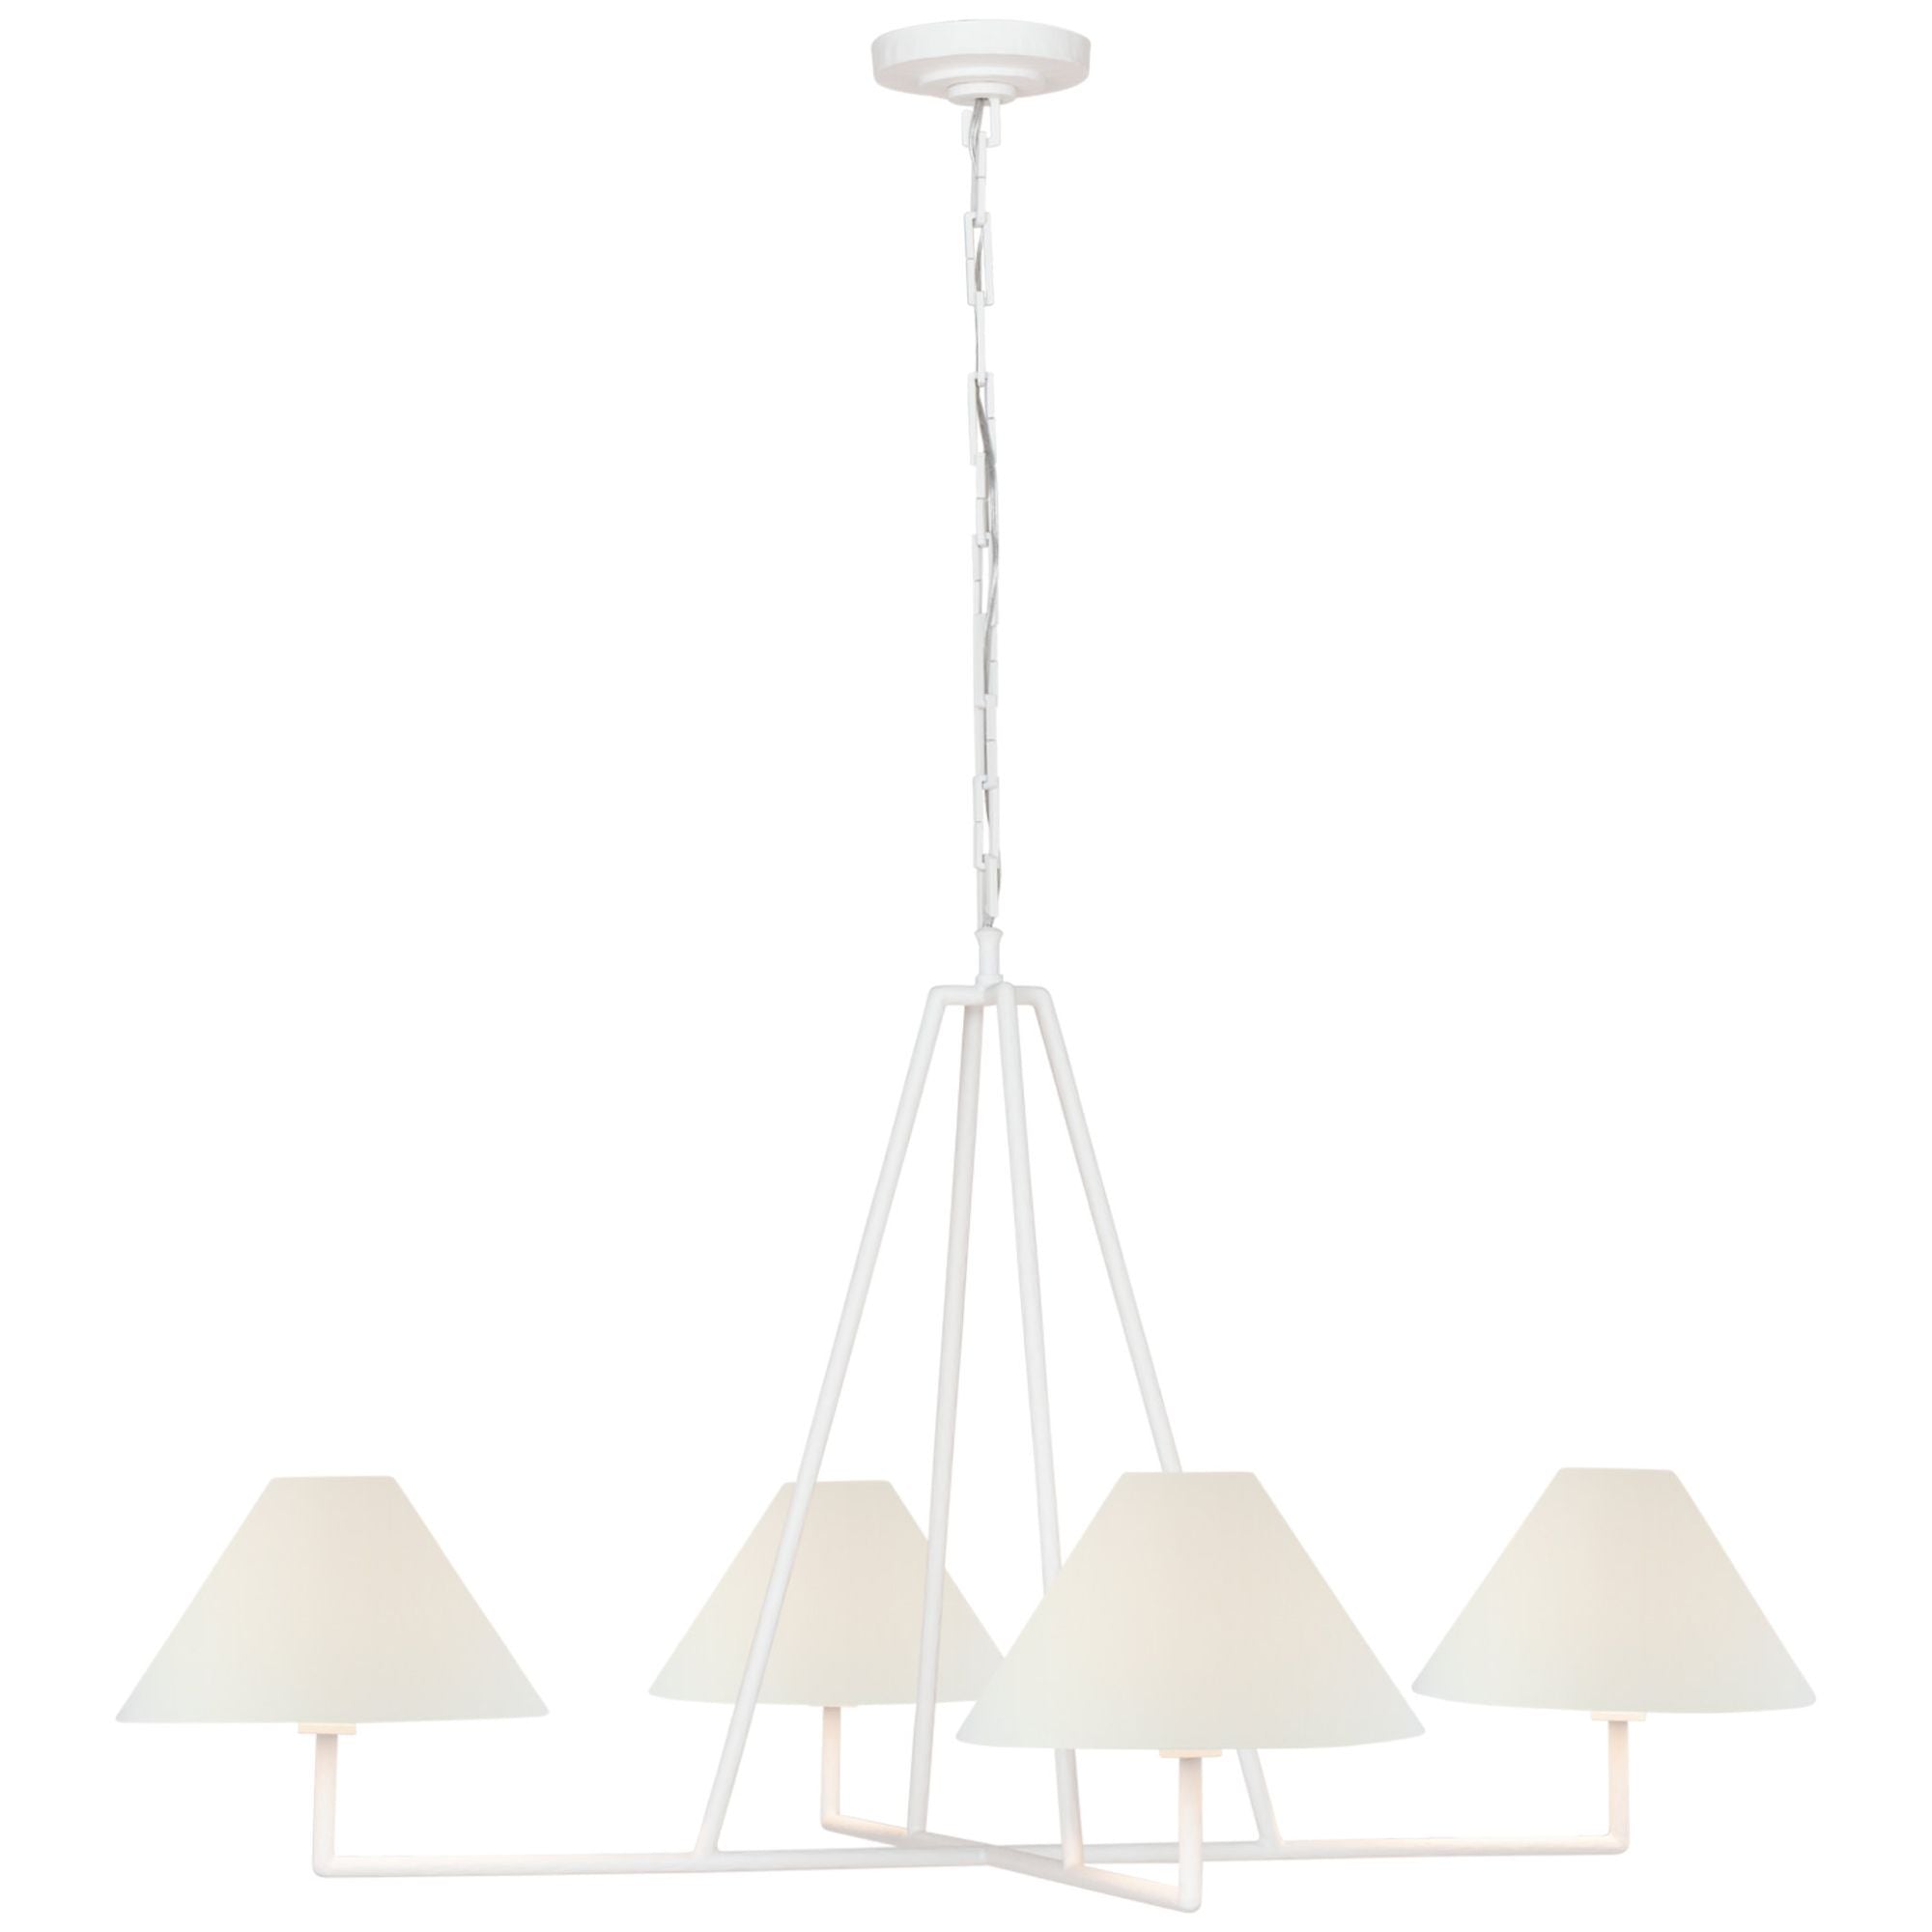 Chapman & Myers Ashton Extra Large Four Light Sculpted Chandelier in Plaster White with Linen Shades